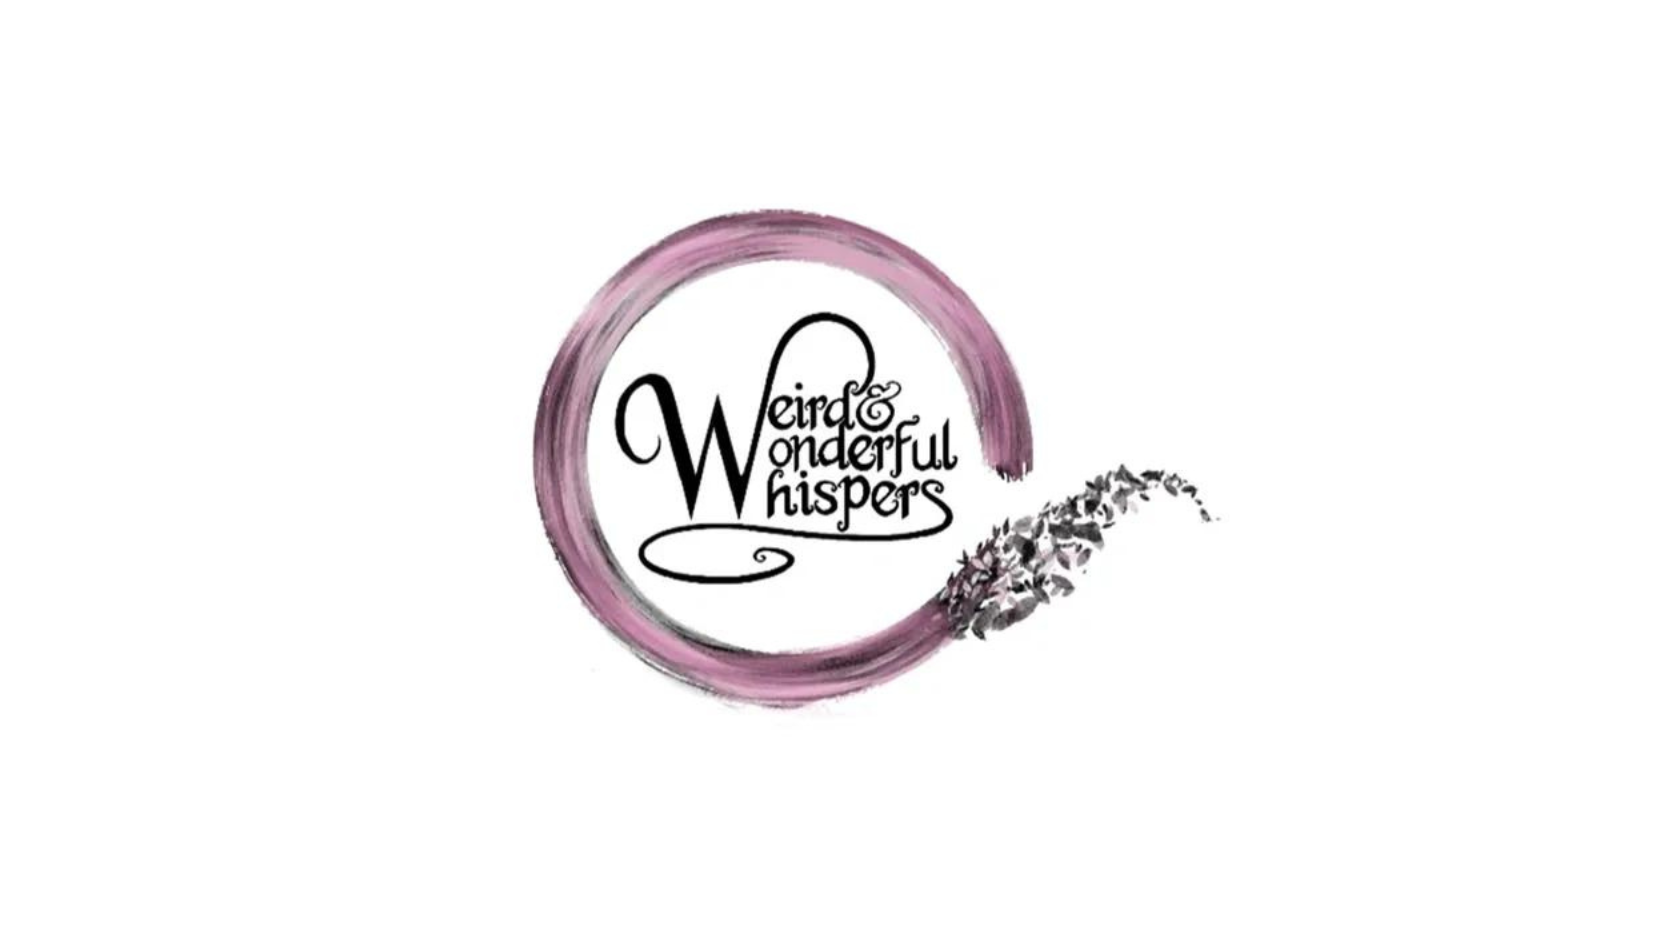 Weird and wonderful whispers logo